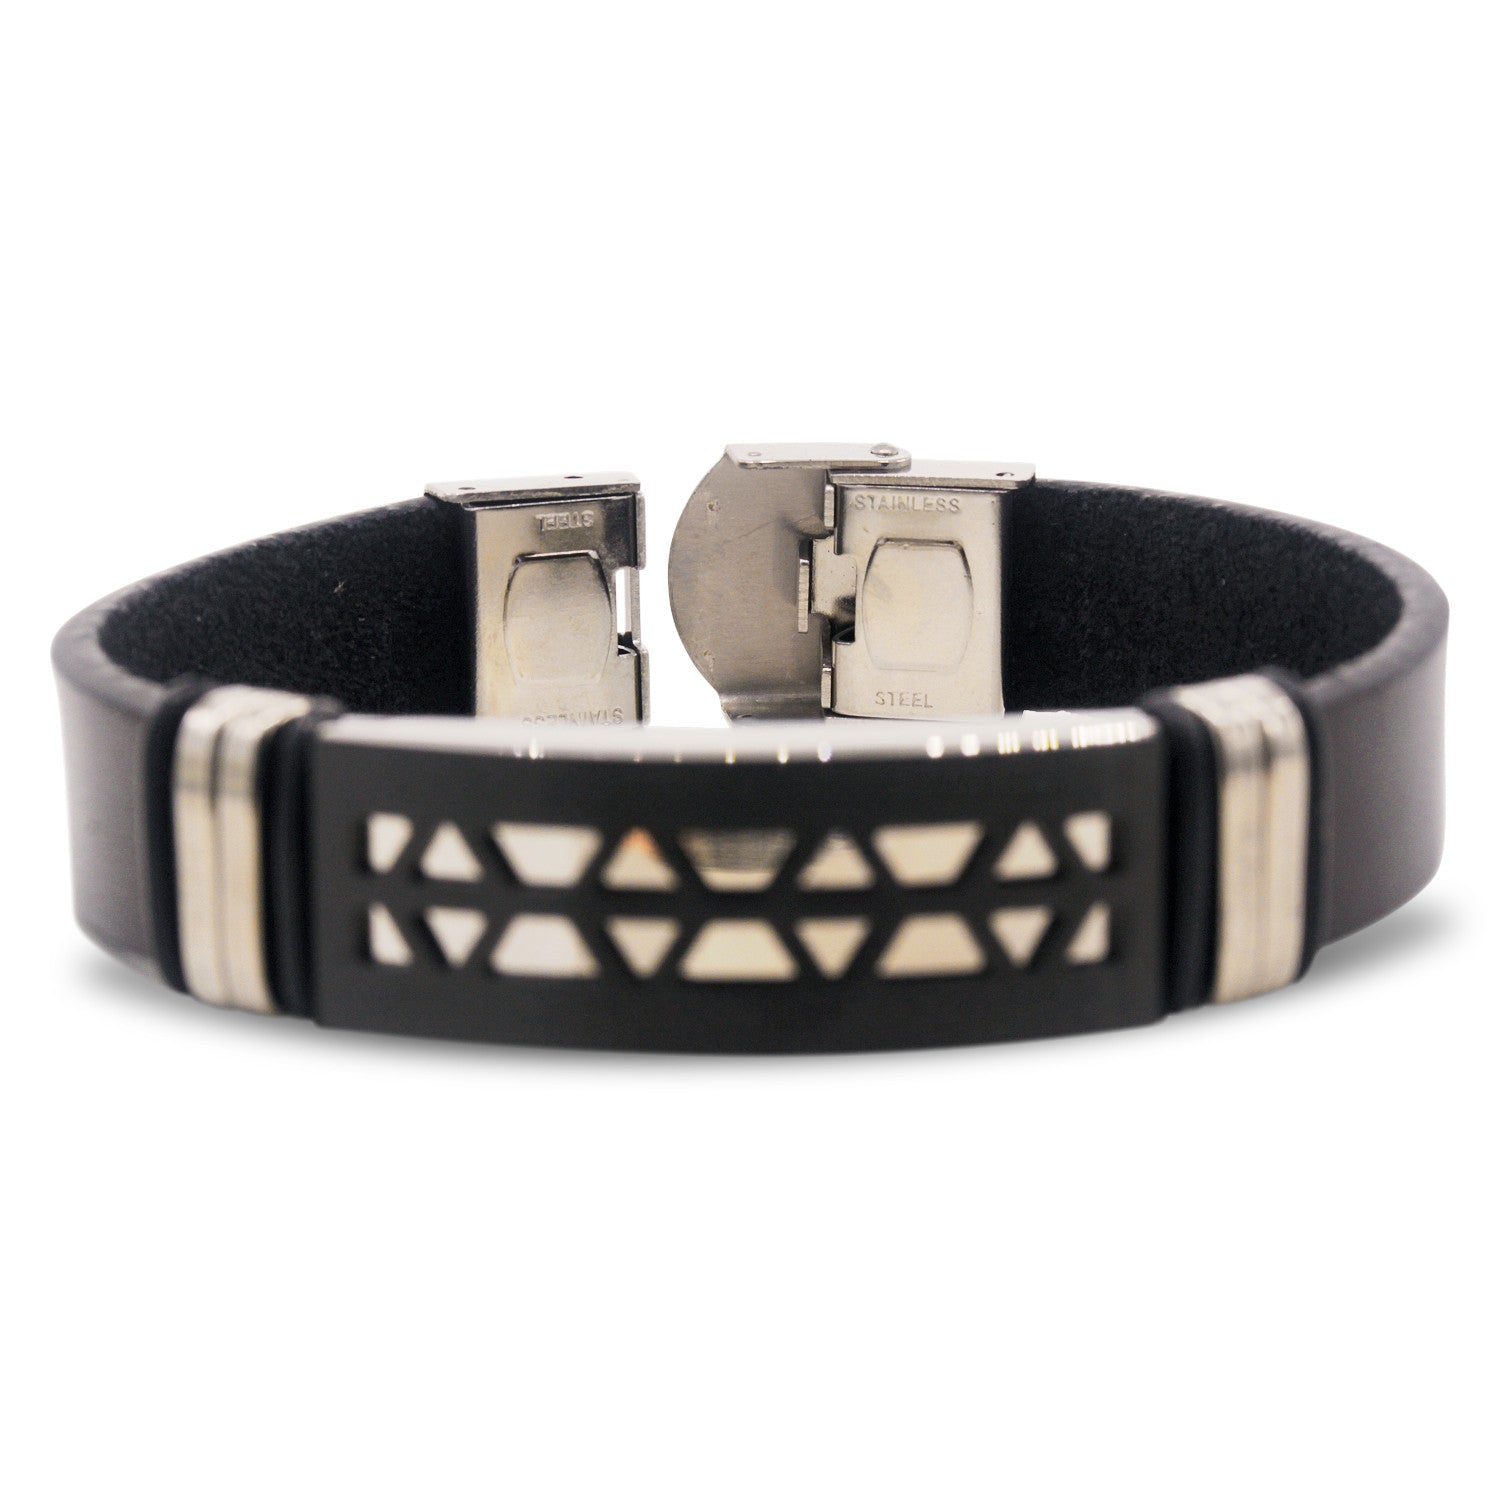 Stainless Steel Black Two Tone Design Leather Bracelet